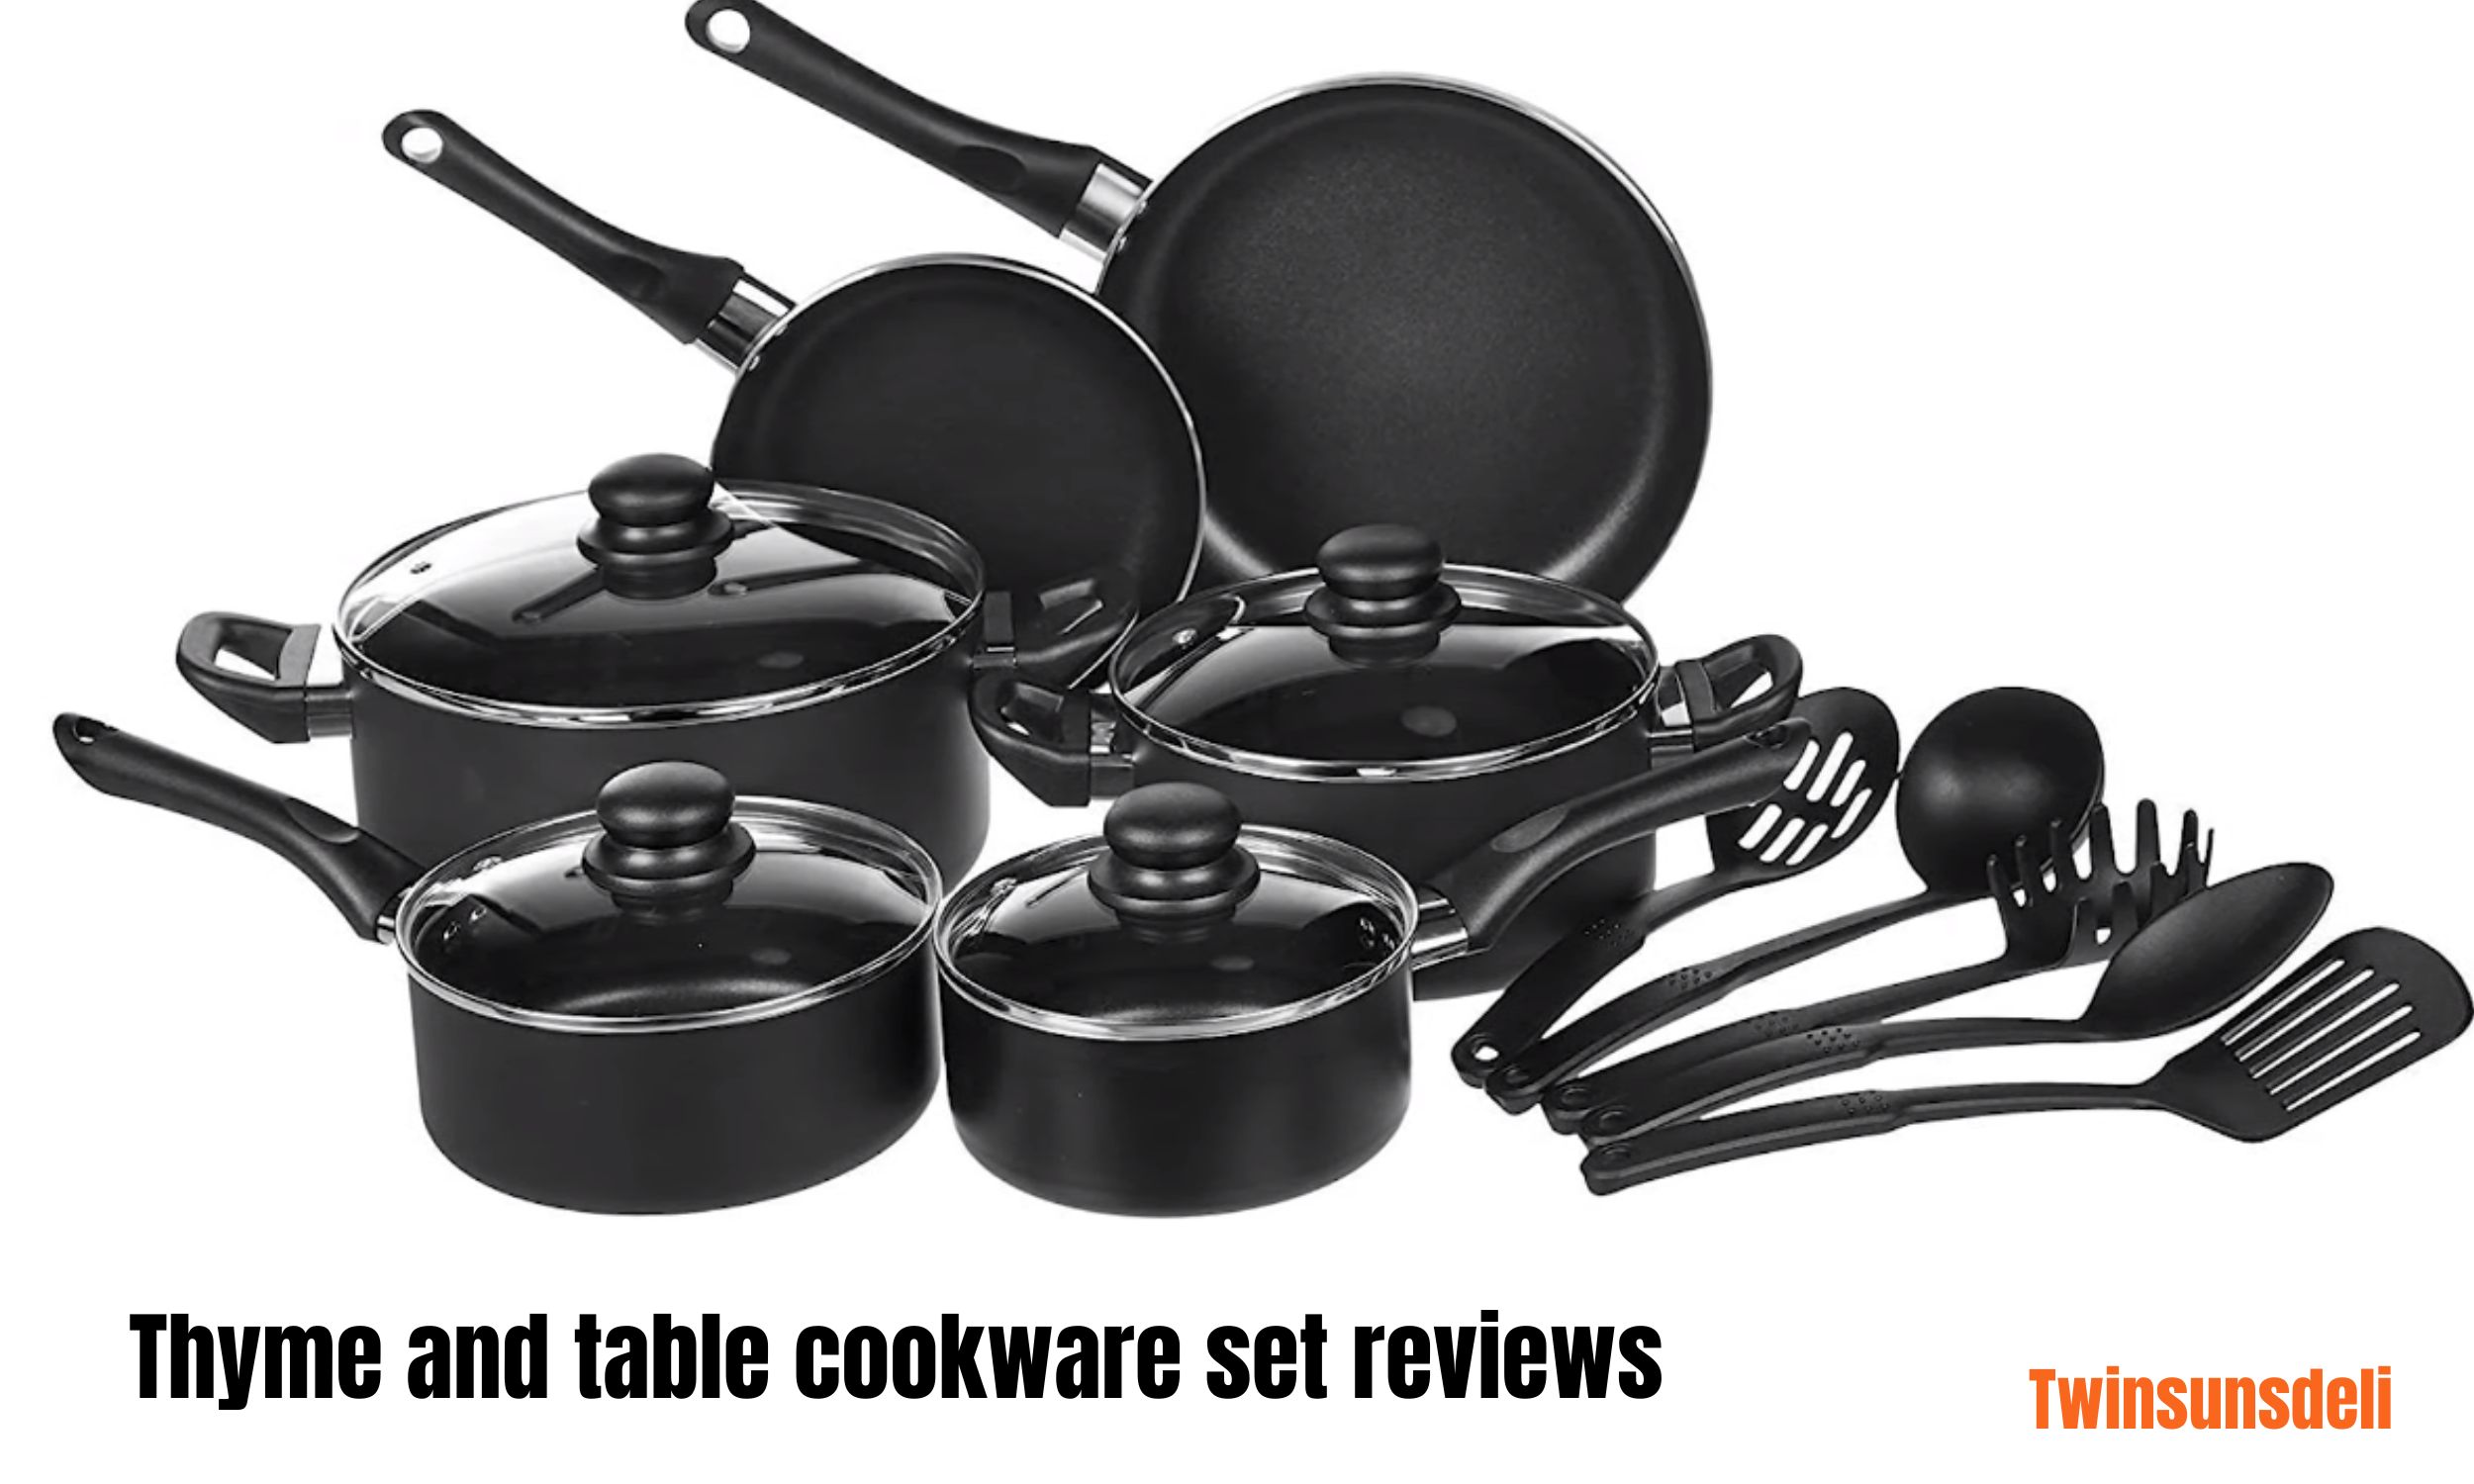 Thyme and table cookware set reviews